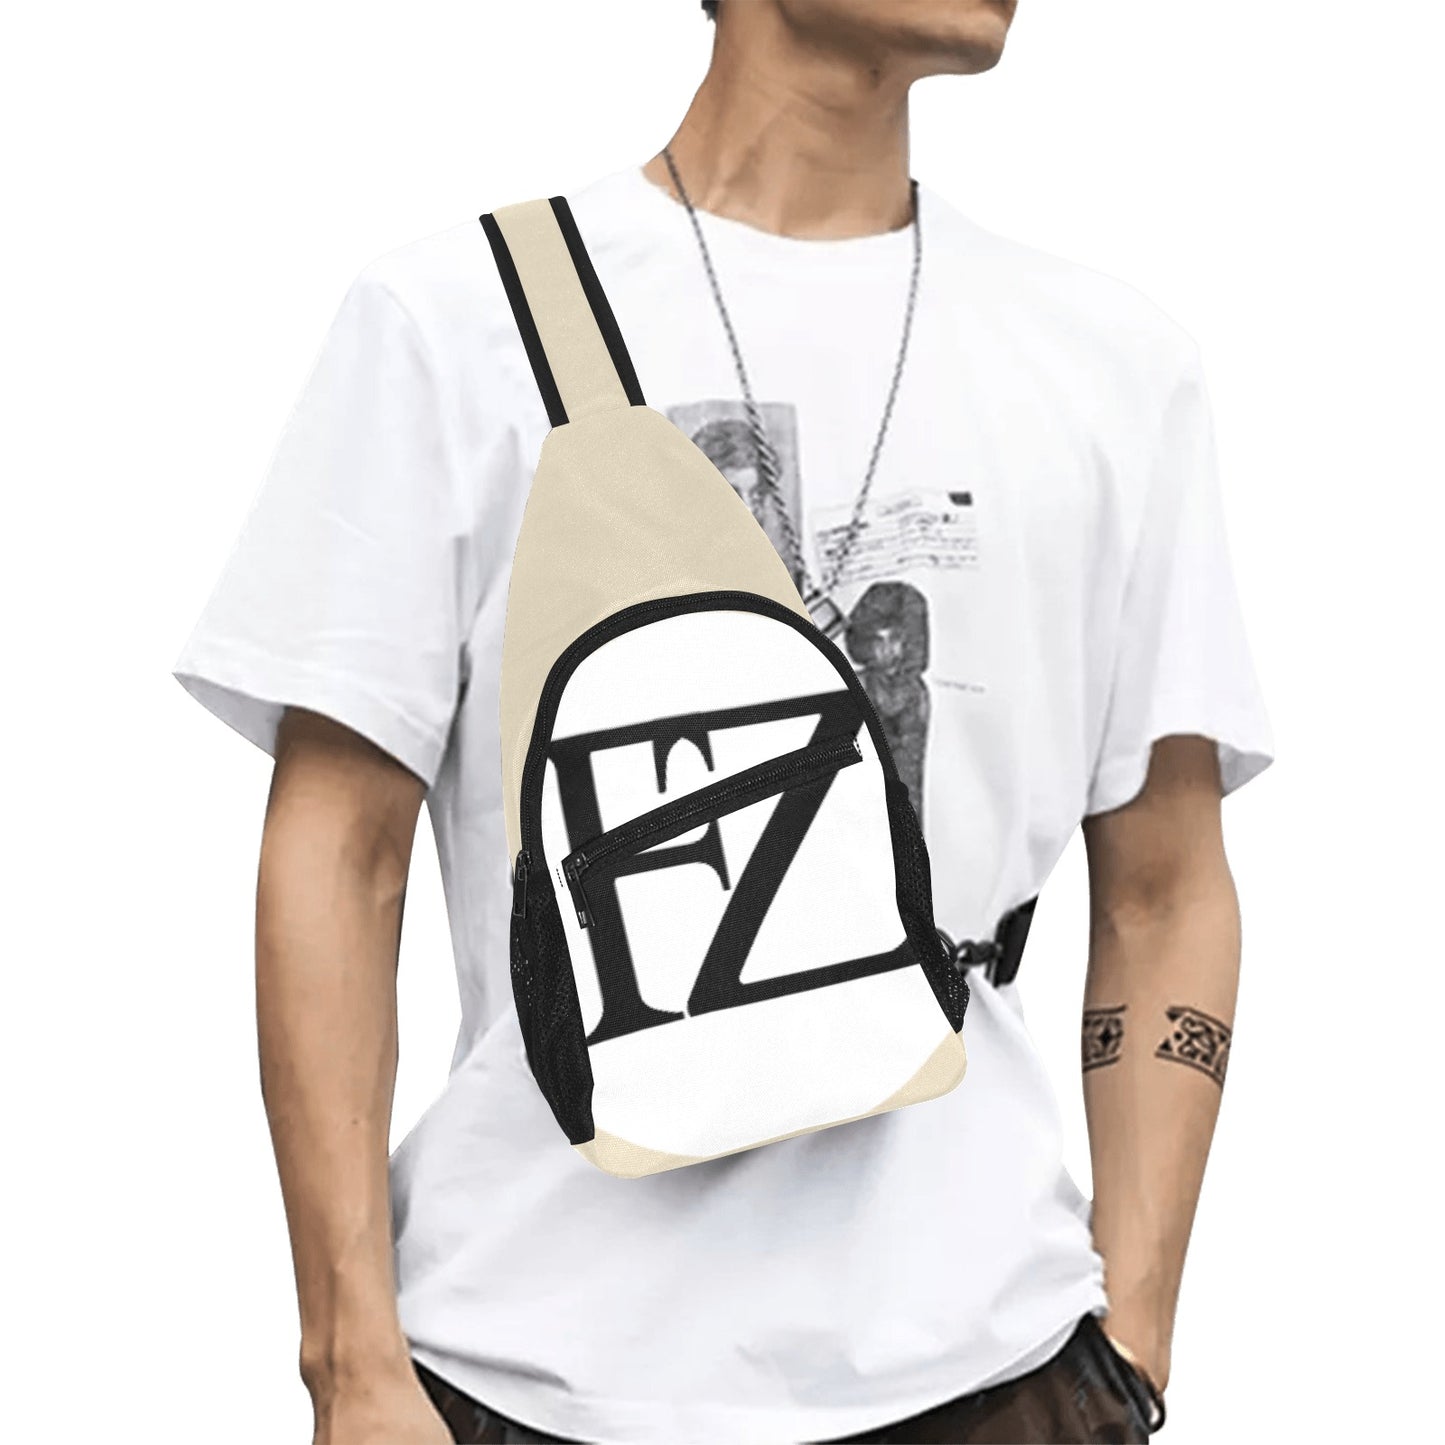 fz men's chest bag too one size / fz men's chest bag too-creme all over print chest bag(model1719)